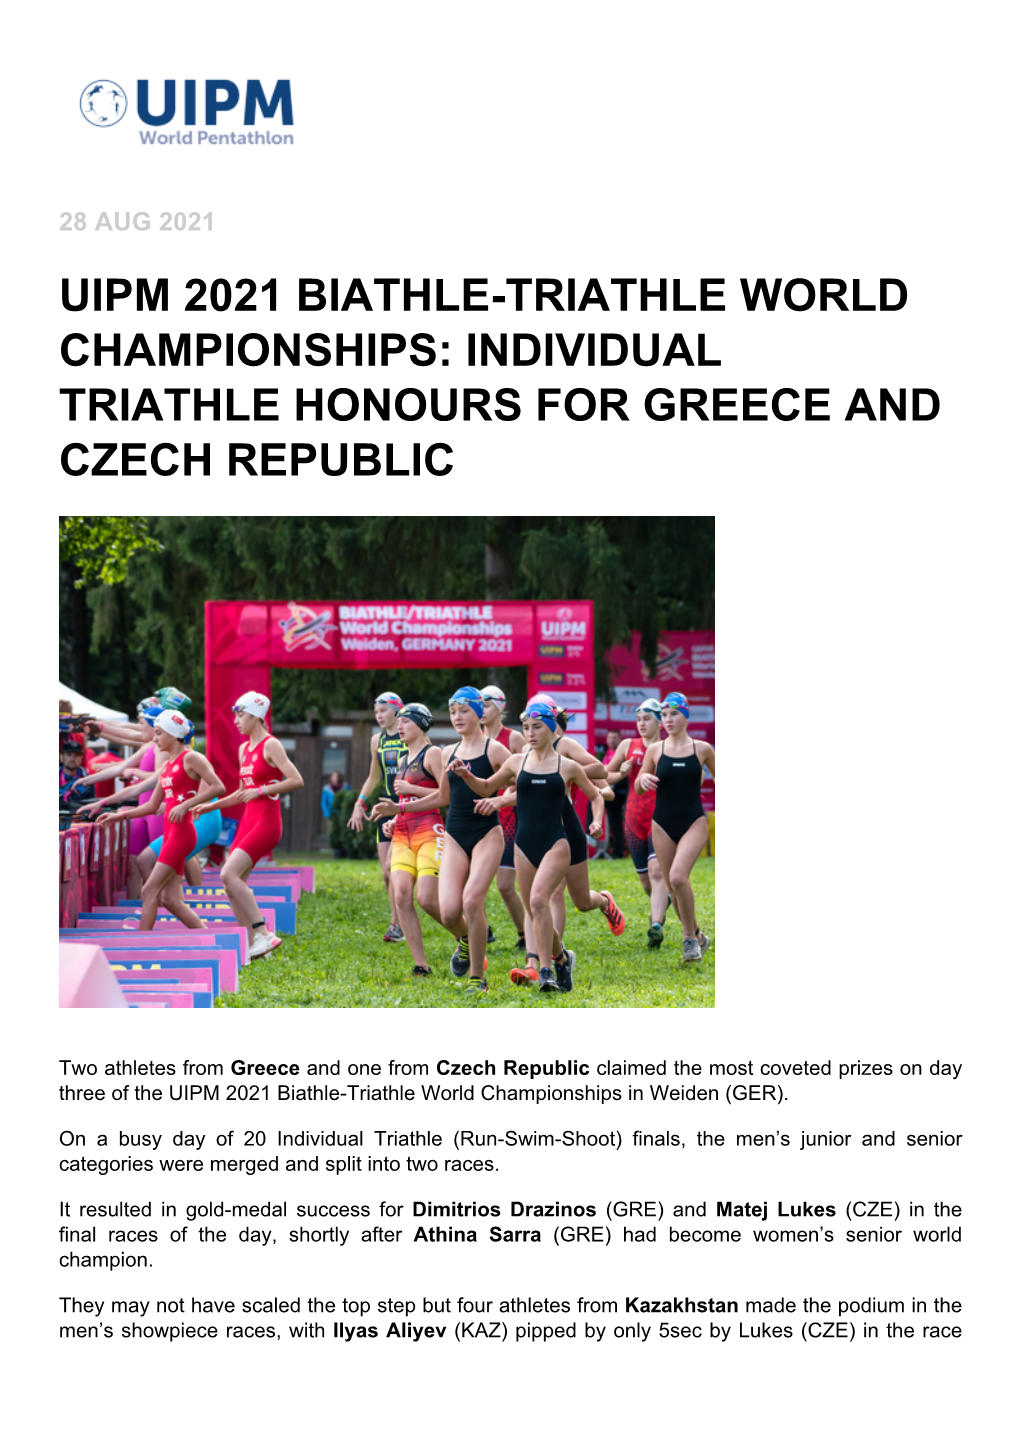 Uipm 2021 Biathle-Triathle World Championships: Individual Triathle Honours for Greece and Czech Republic